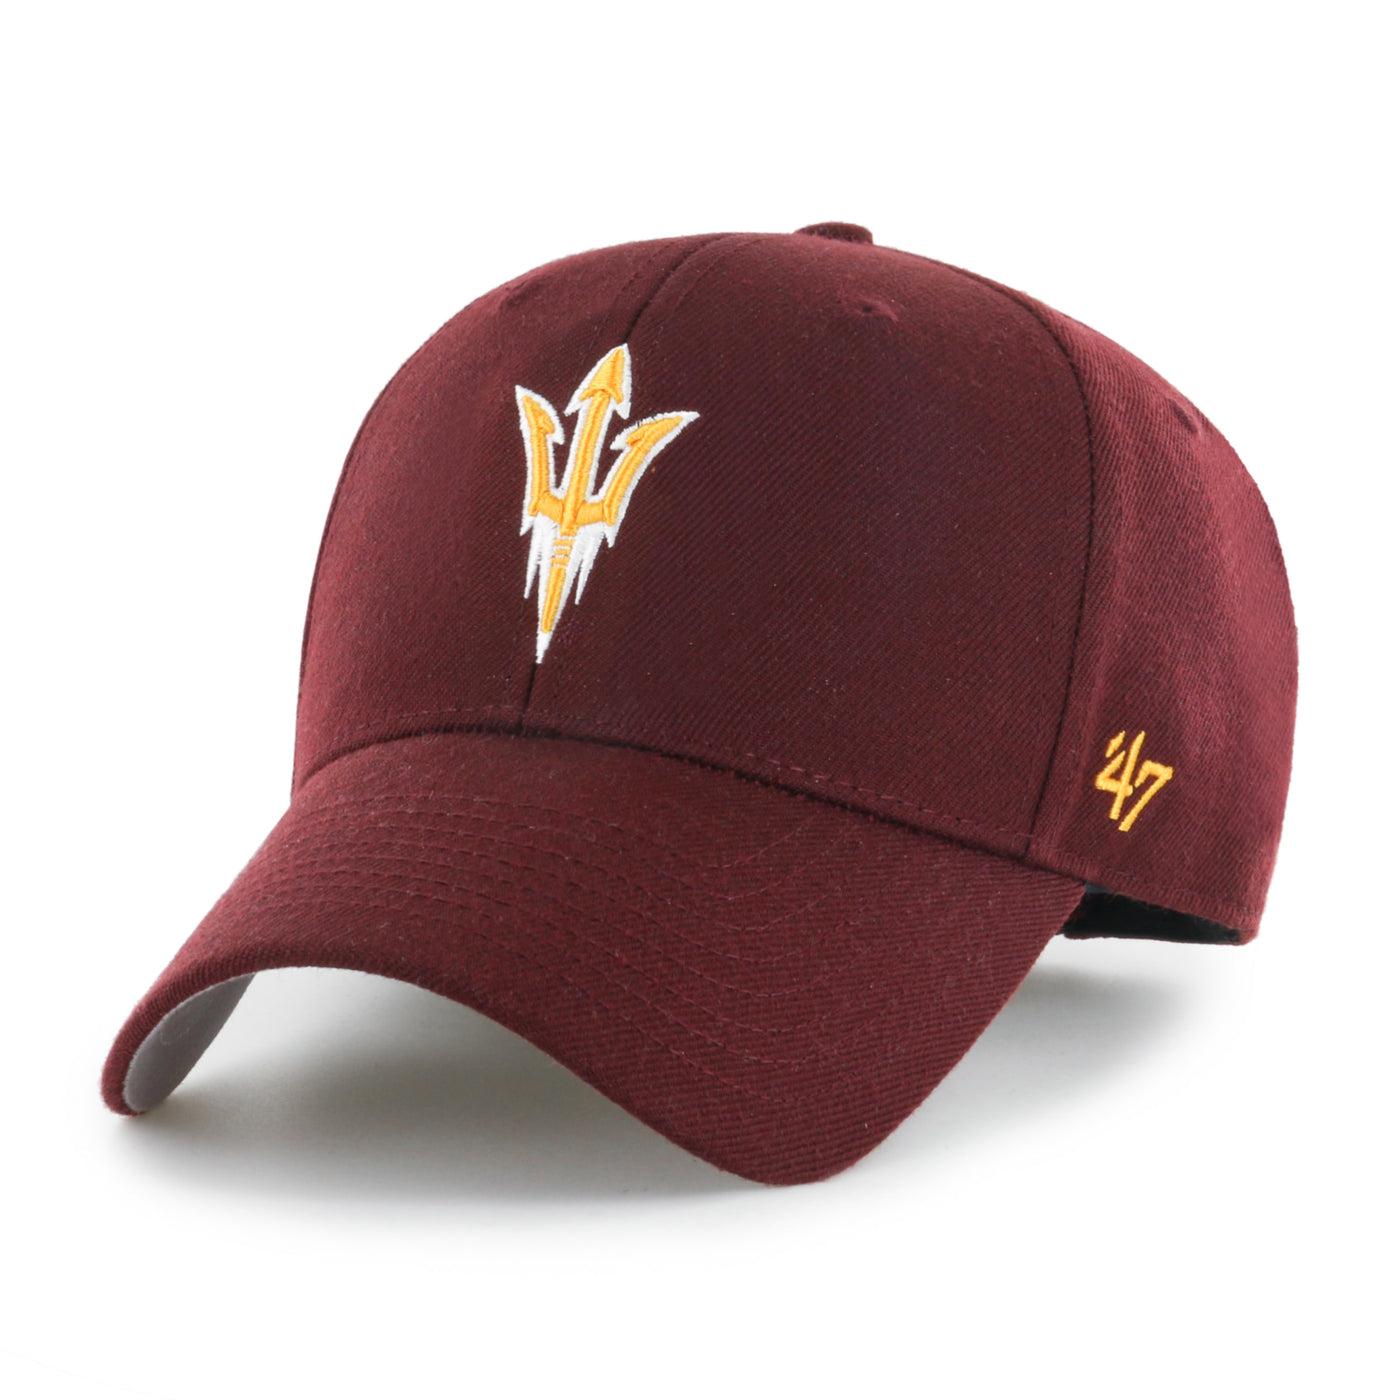 ASu maroon adjustable hat with structured shell and a gold and white pitchfork on the front